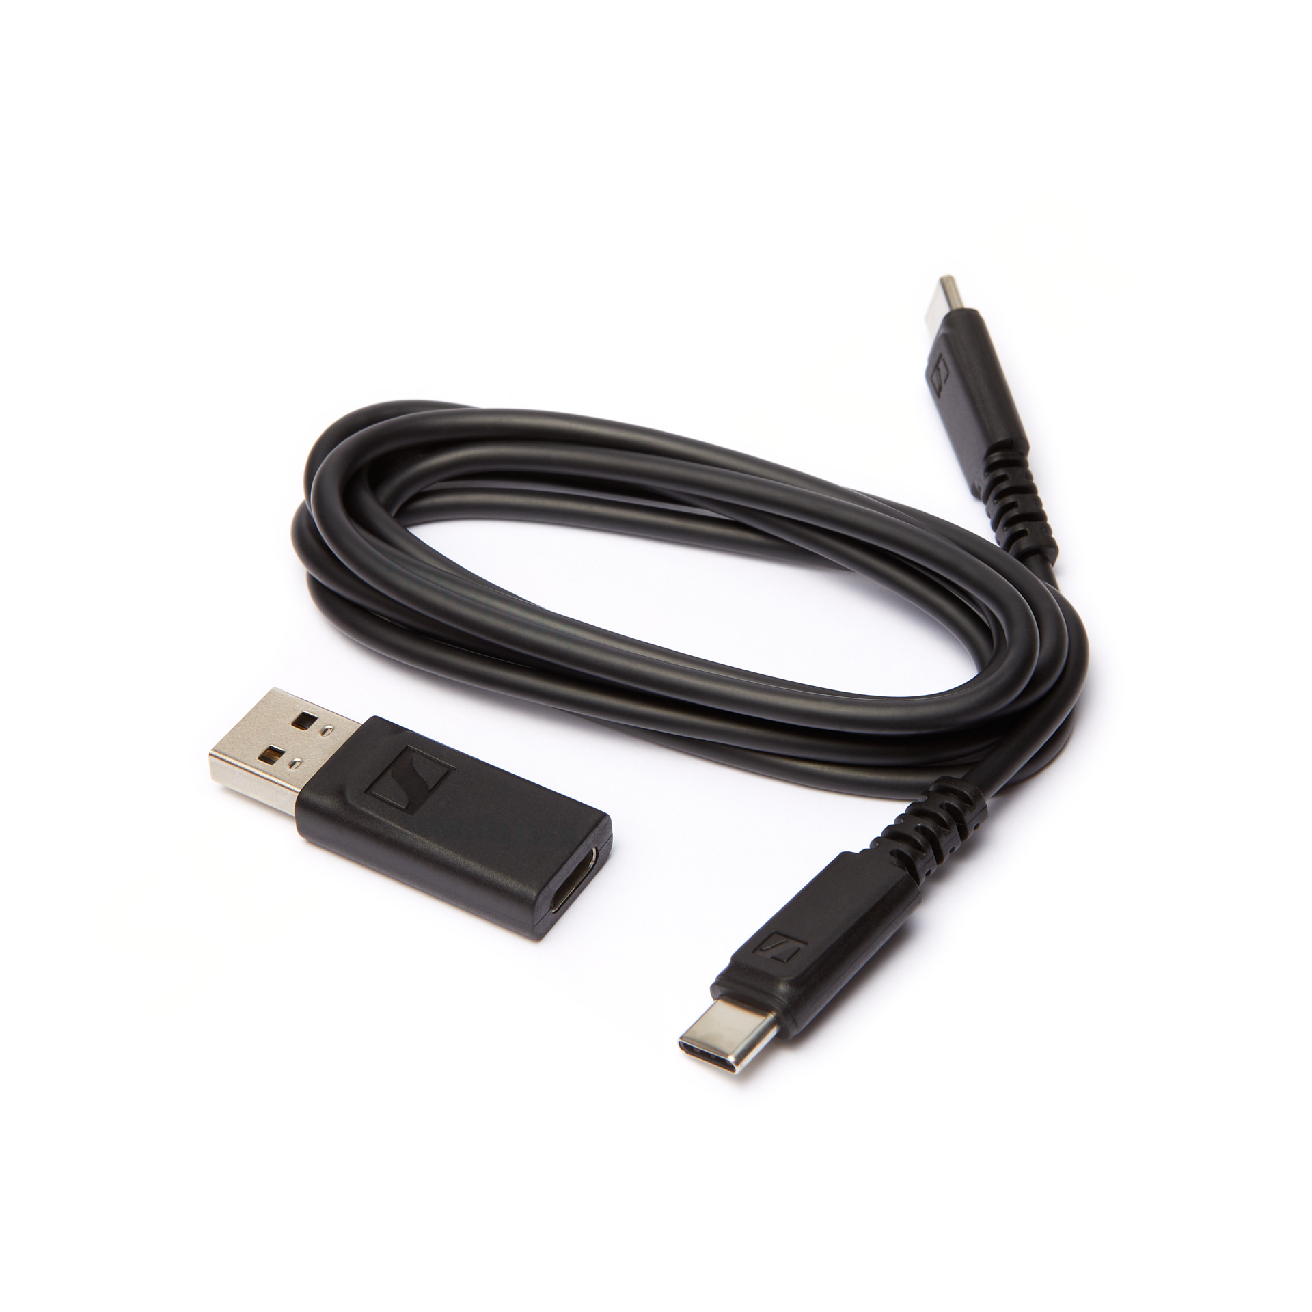 CABLE USB C WITH ADAPTER USB A